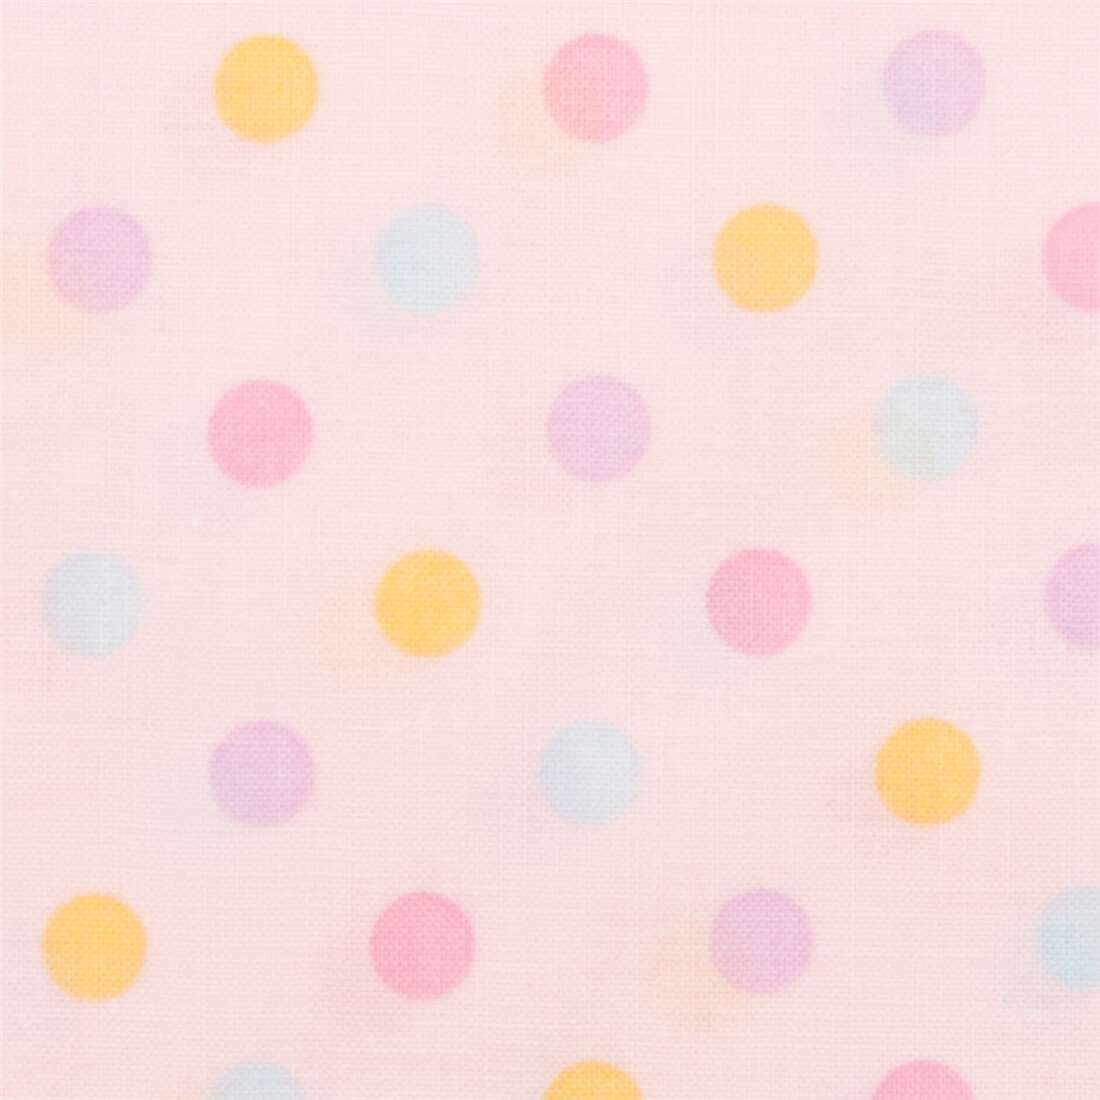 https://kawaii.kawaii.at/images/product_images/big_images/yellow-blue-purple-pink-polka-dots-in-a-grid-on-pink-Japan-cotton-fabric-251396-6.jpg